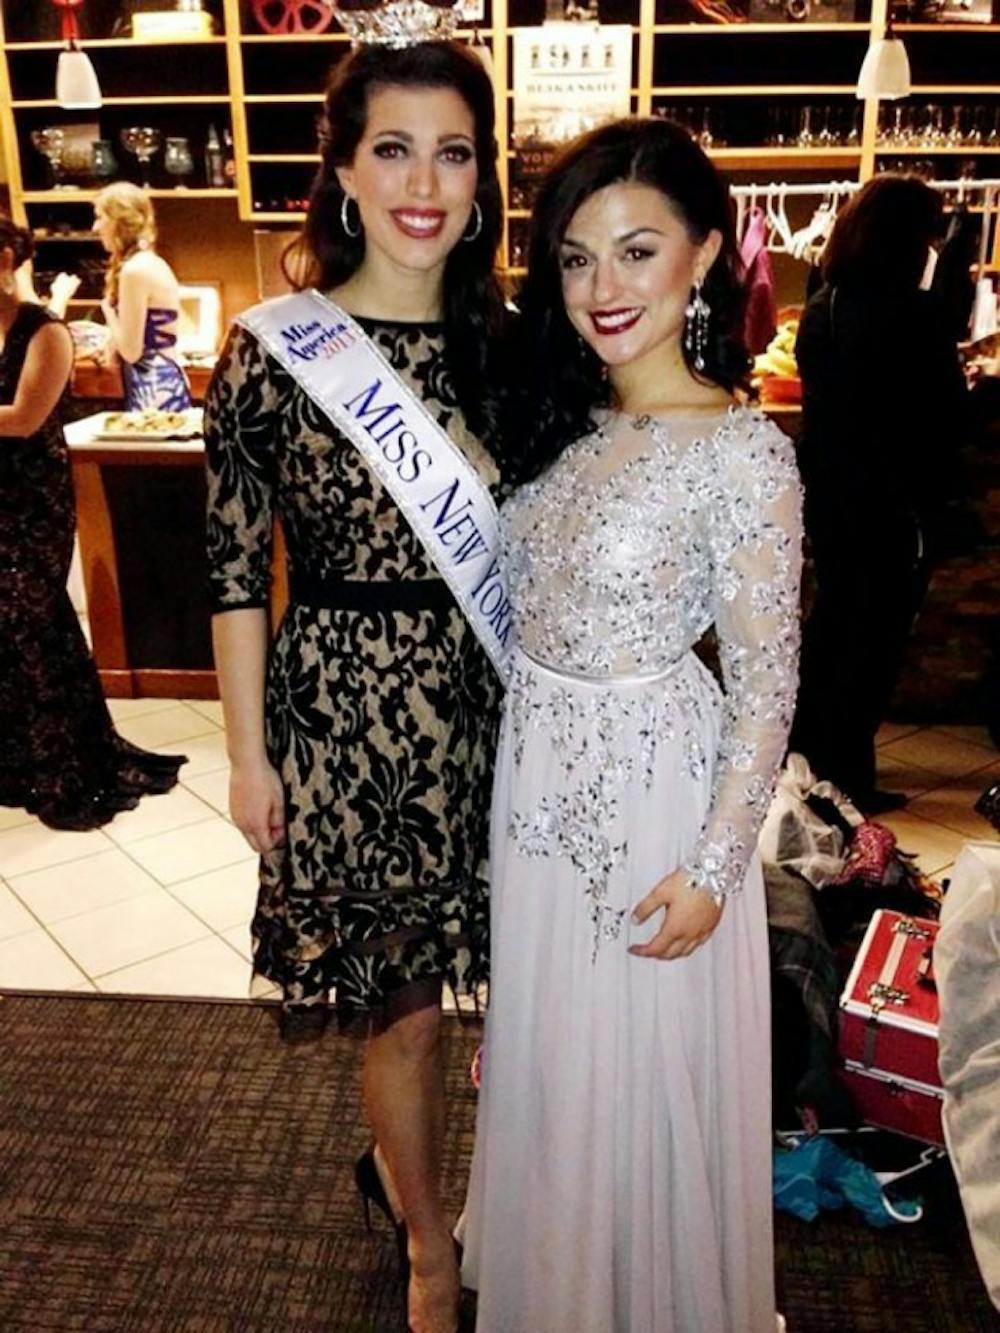 Anastasia Harisis, a junior biology major, with her mentor Miss New York 2013,
Amanda Mason. Harisis has been competing in beauty pageants since
high school and uses the pageants as an outlet to teach others about melanoma,
which she was diagnosed with at age 18. She is now cancer-free.
Courtesy of Anastasia Harisis 